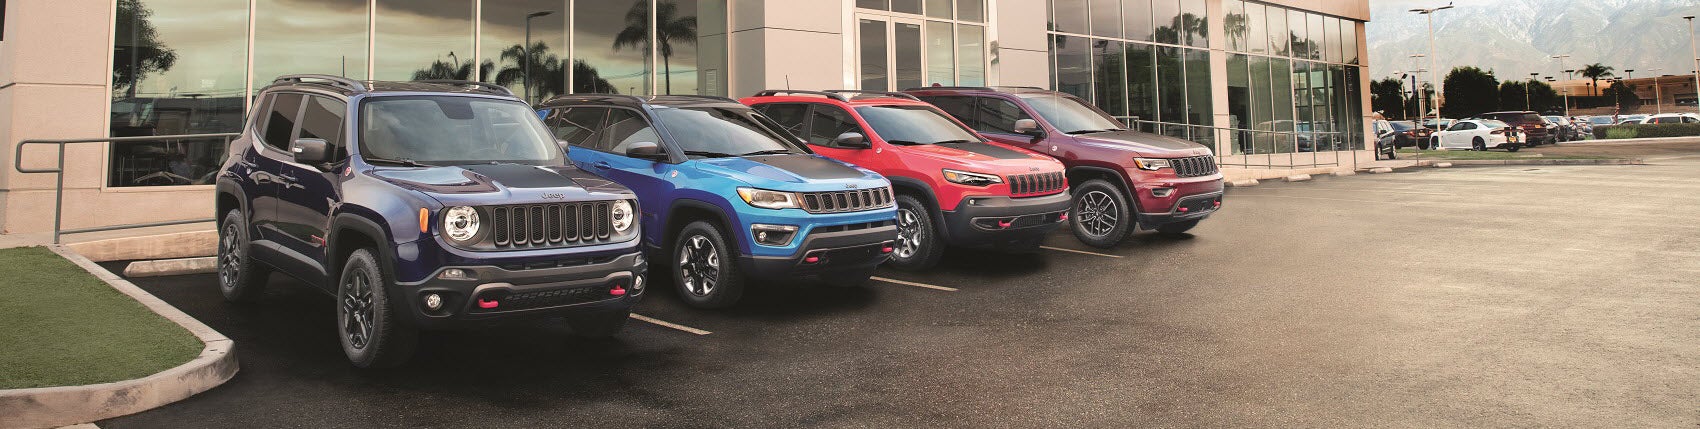 Jeep Lease Deals Dunmore PA